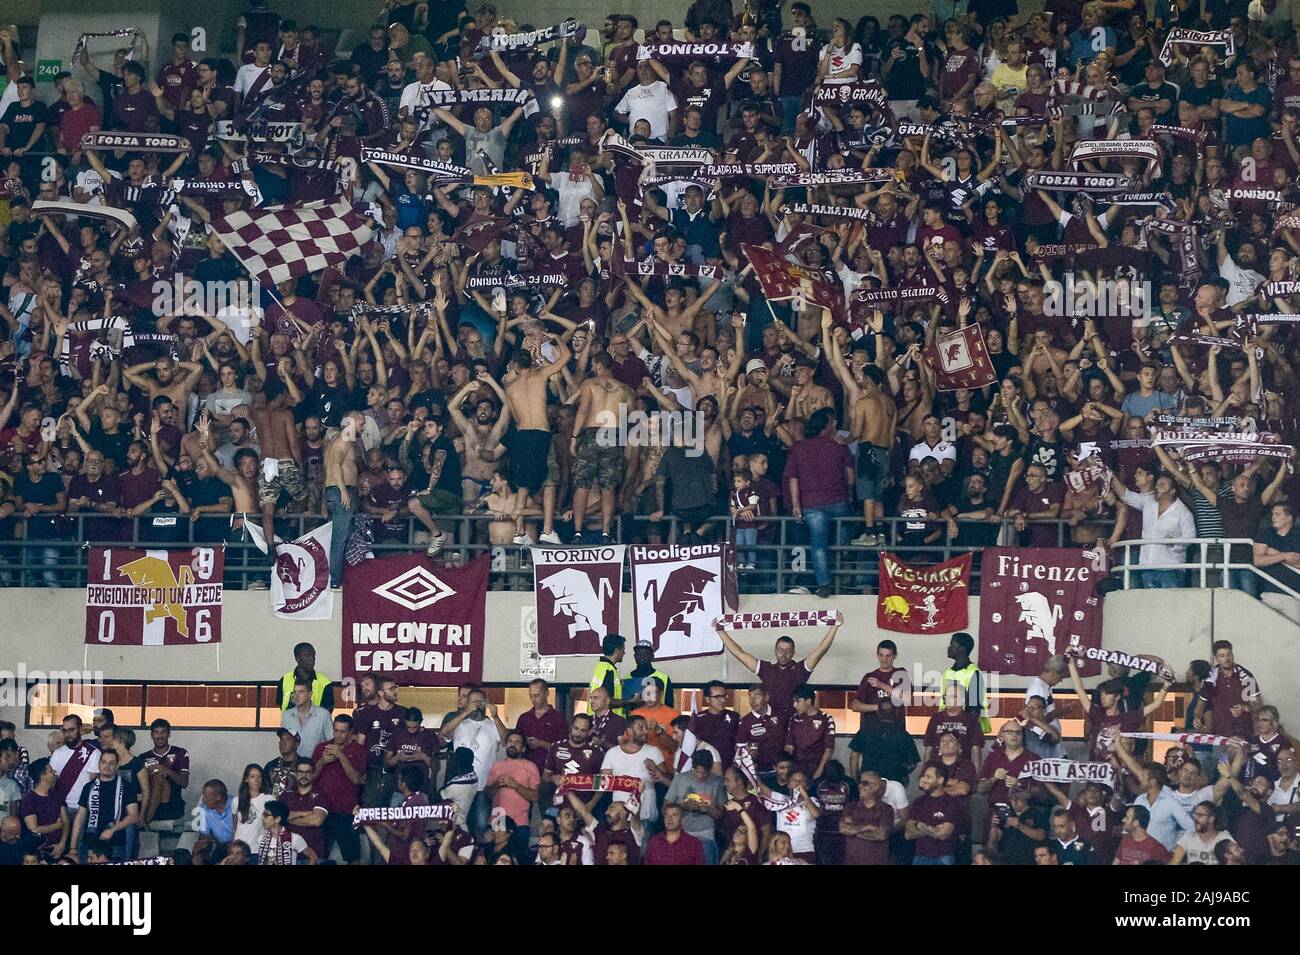 Turin, Italy. 22 August, 2019: Torino fans in sector 'Curva Primavera' show their support behind the banner 'Torino Hooligans' during the UEFA Europa League playoff football match between Torino FC and Wolverhampton Wanderers FC. . On 11 december 2019, 75 ultras belonging to the 'Torino Hooligans' group received DASPO (ban on access to sporting events to prevent violence at stadiums) and 71 were reported for violent crimes. Credit: Nicolò Campo/Alamy Live News Stock Photo